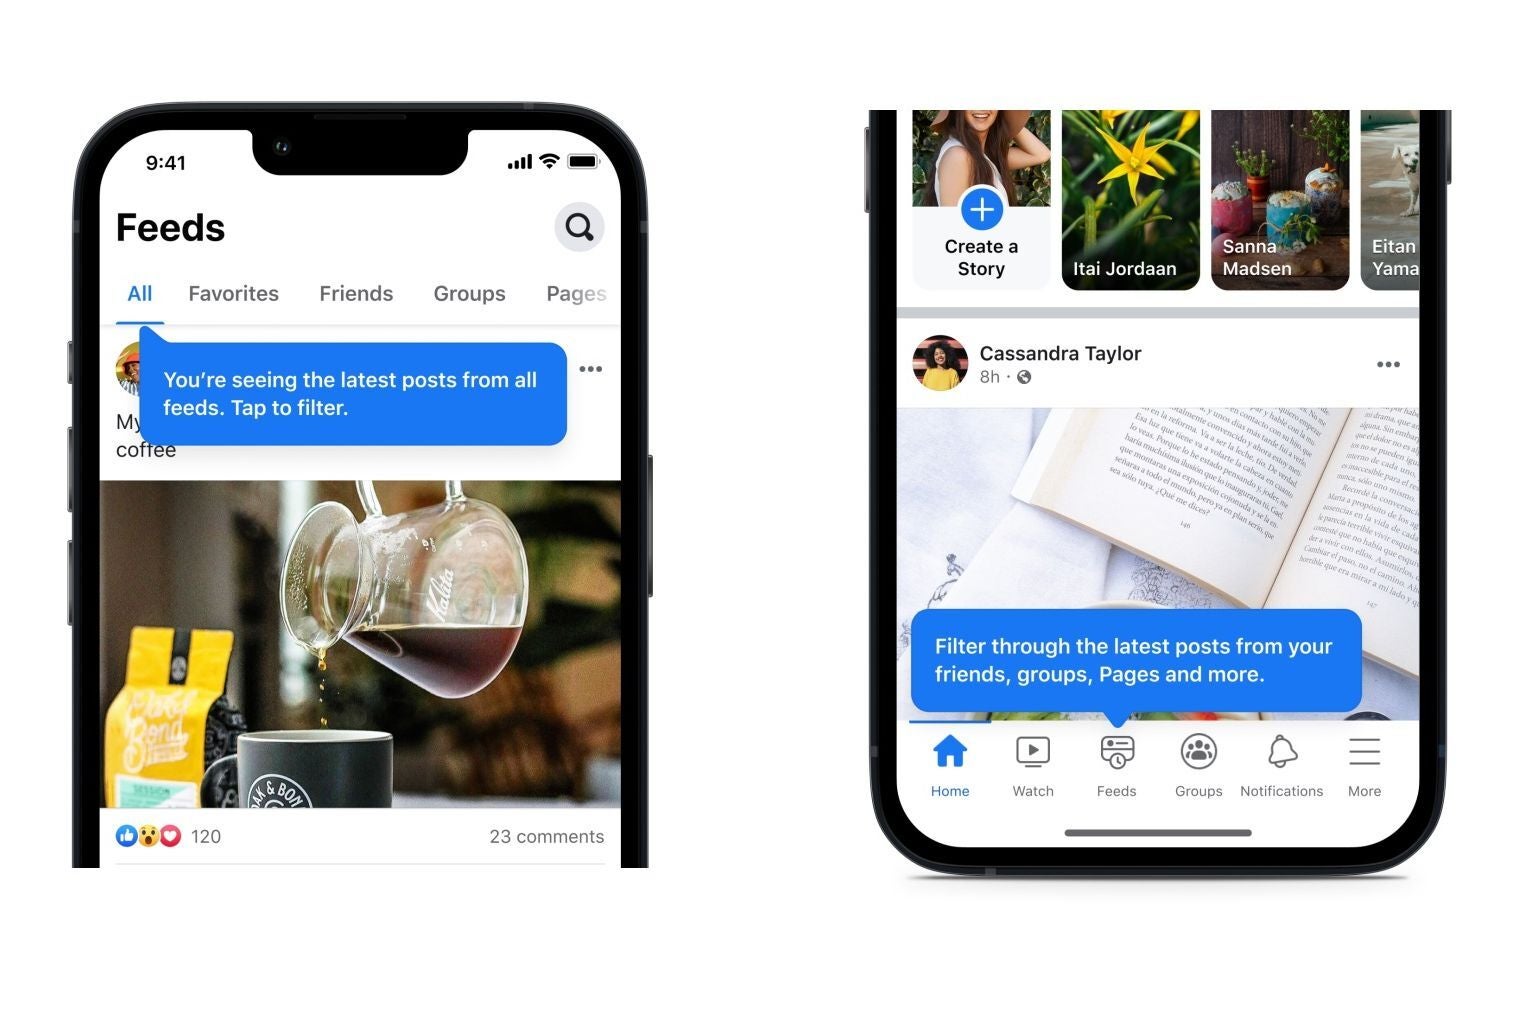 Facebook starts rolling out chronologically ordered Feeds